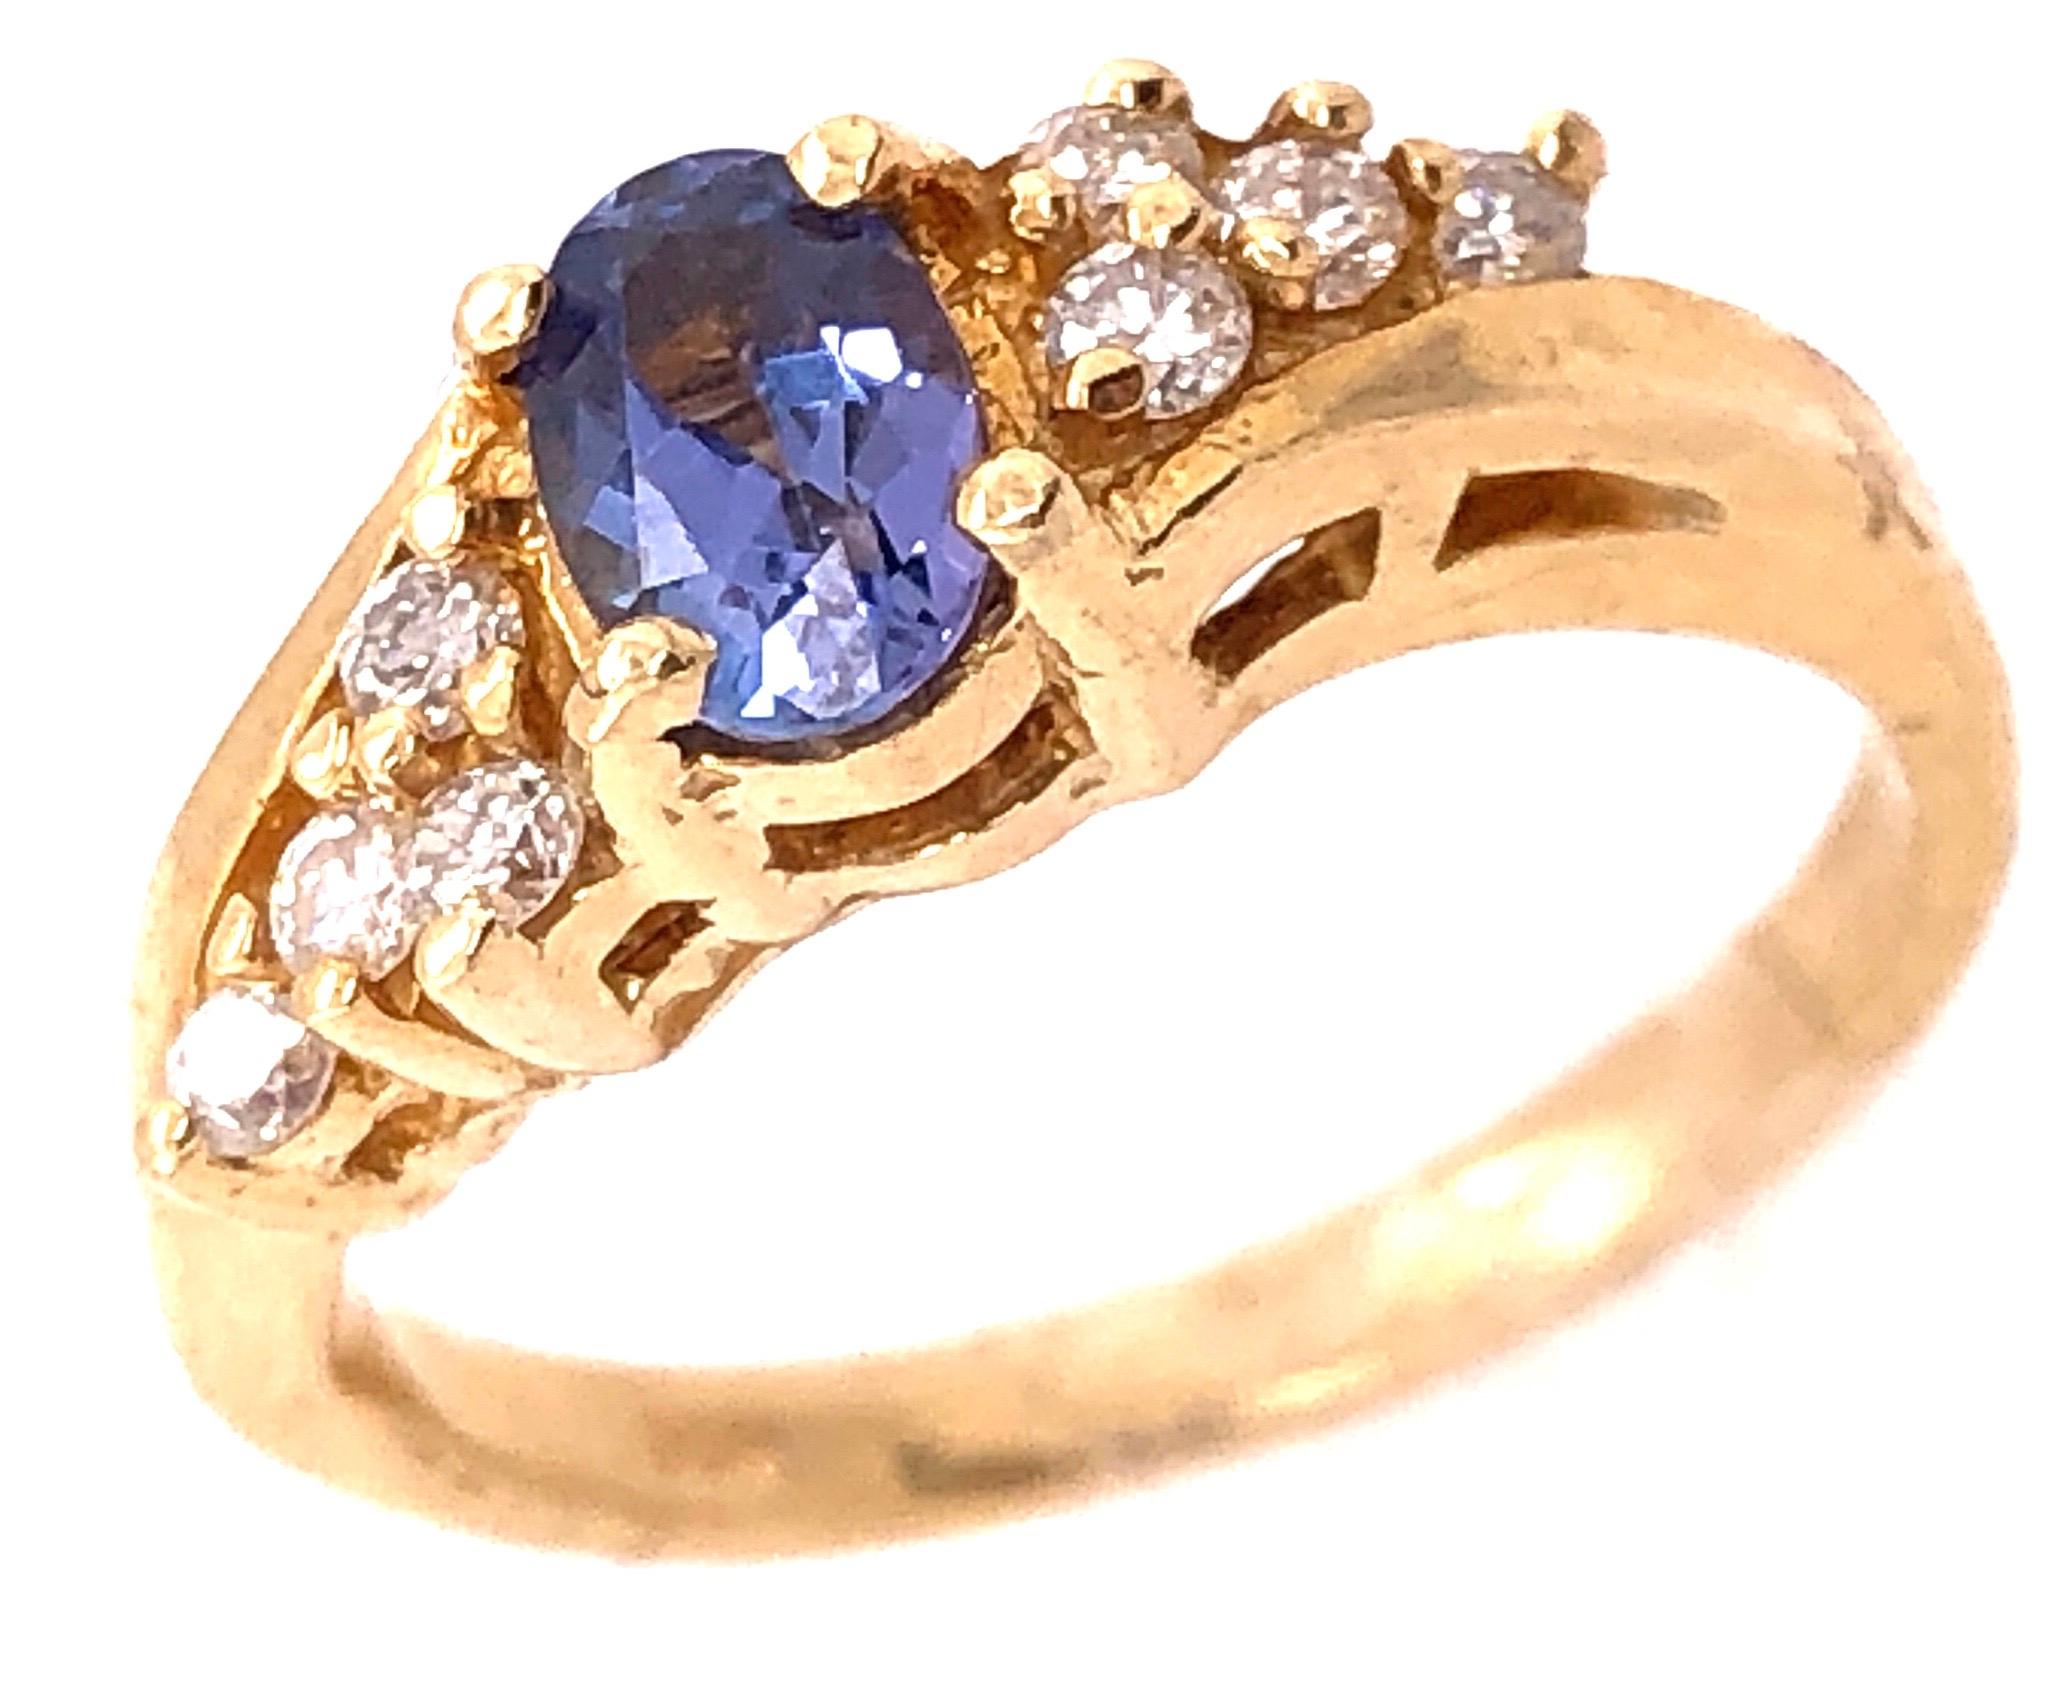 14 Karat Yellow Gold Contemporary Topaz Ring with Round Diamonds 0.20 TDW 
Size 5 
4 grams total weight.